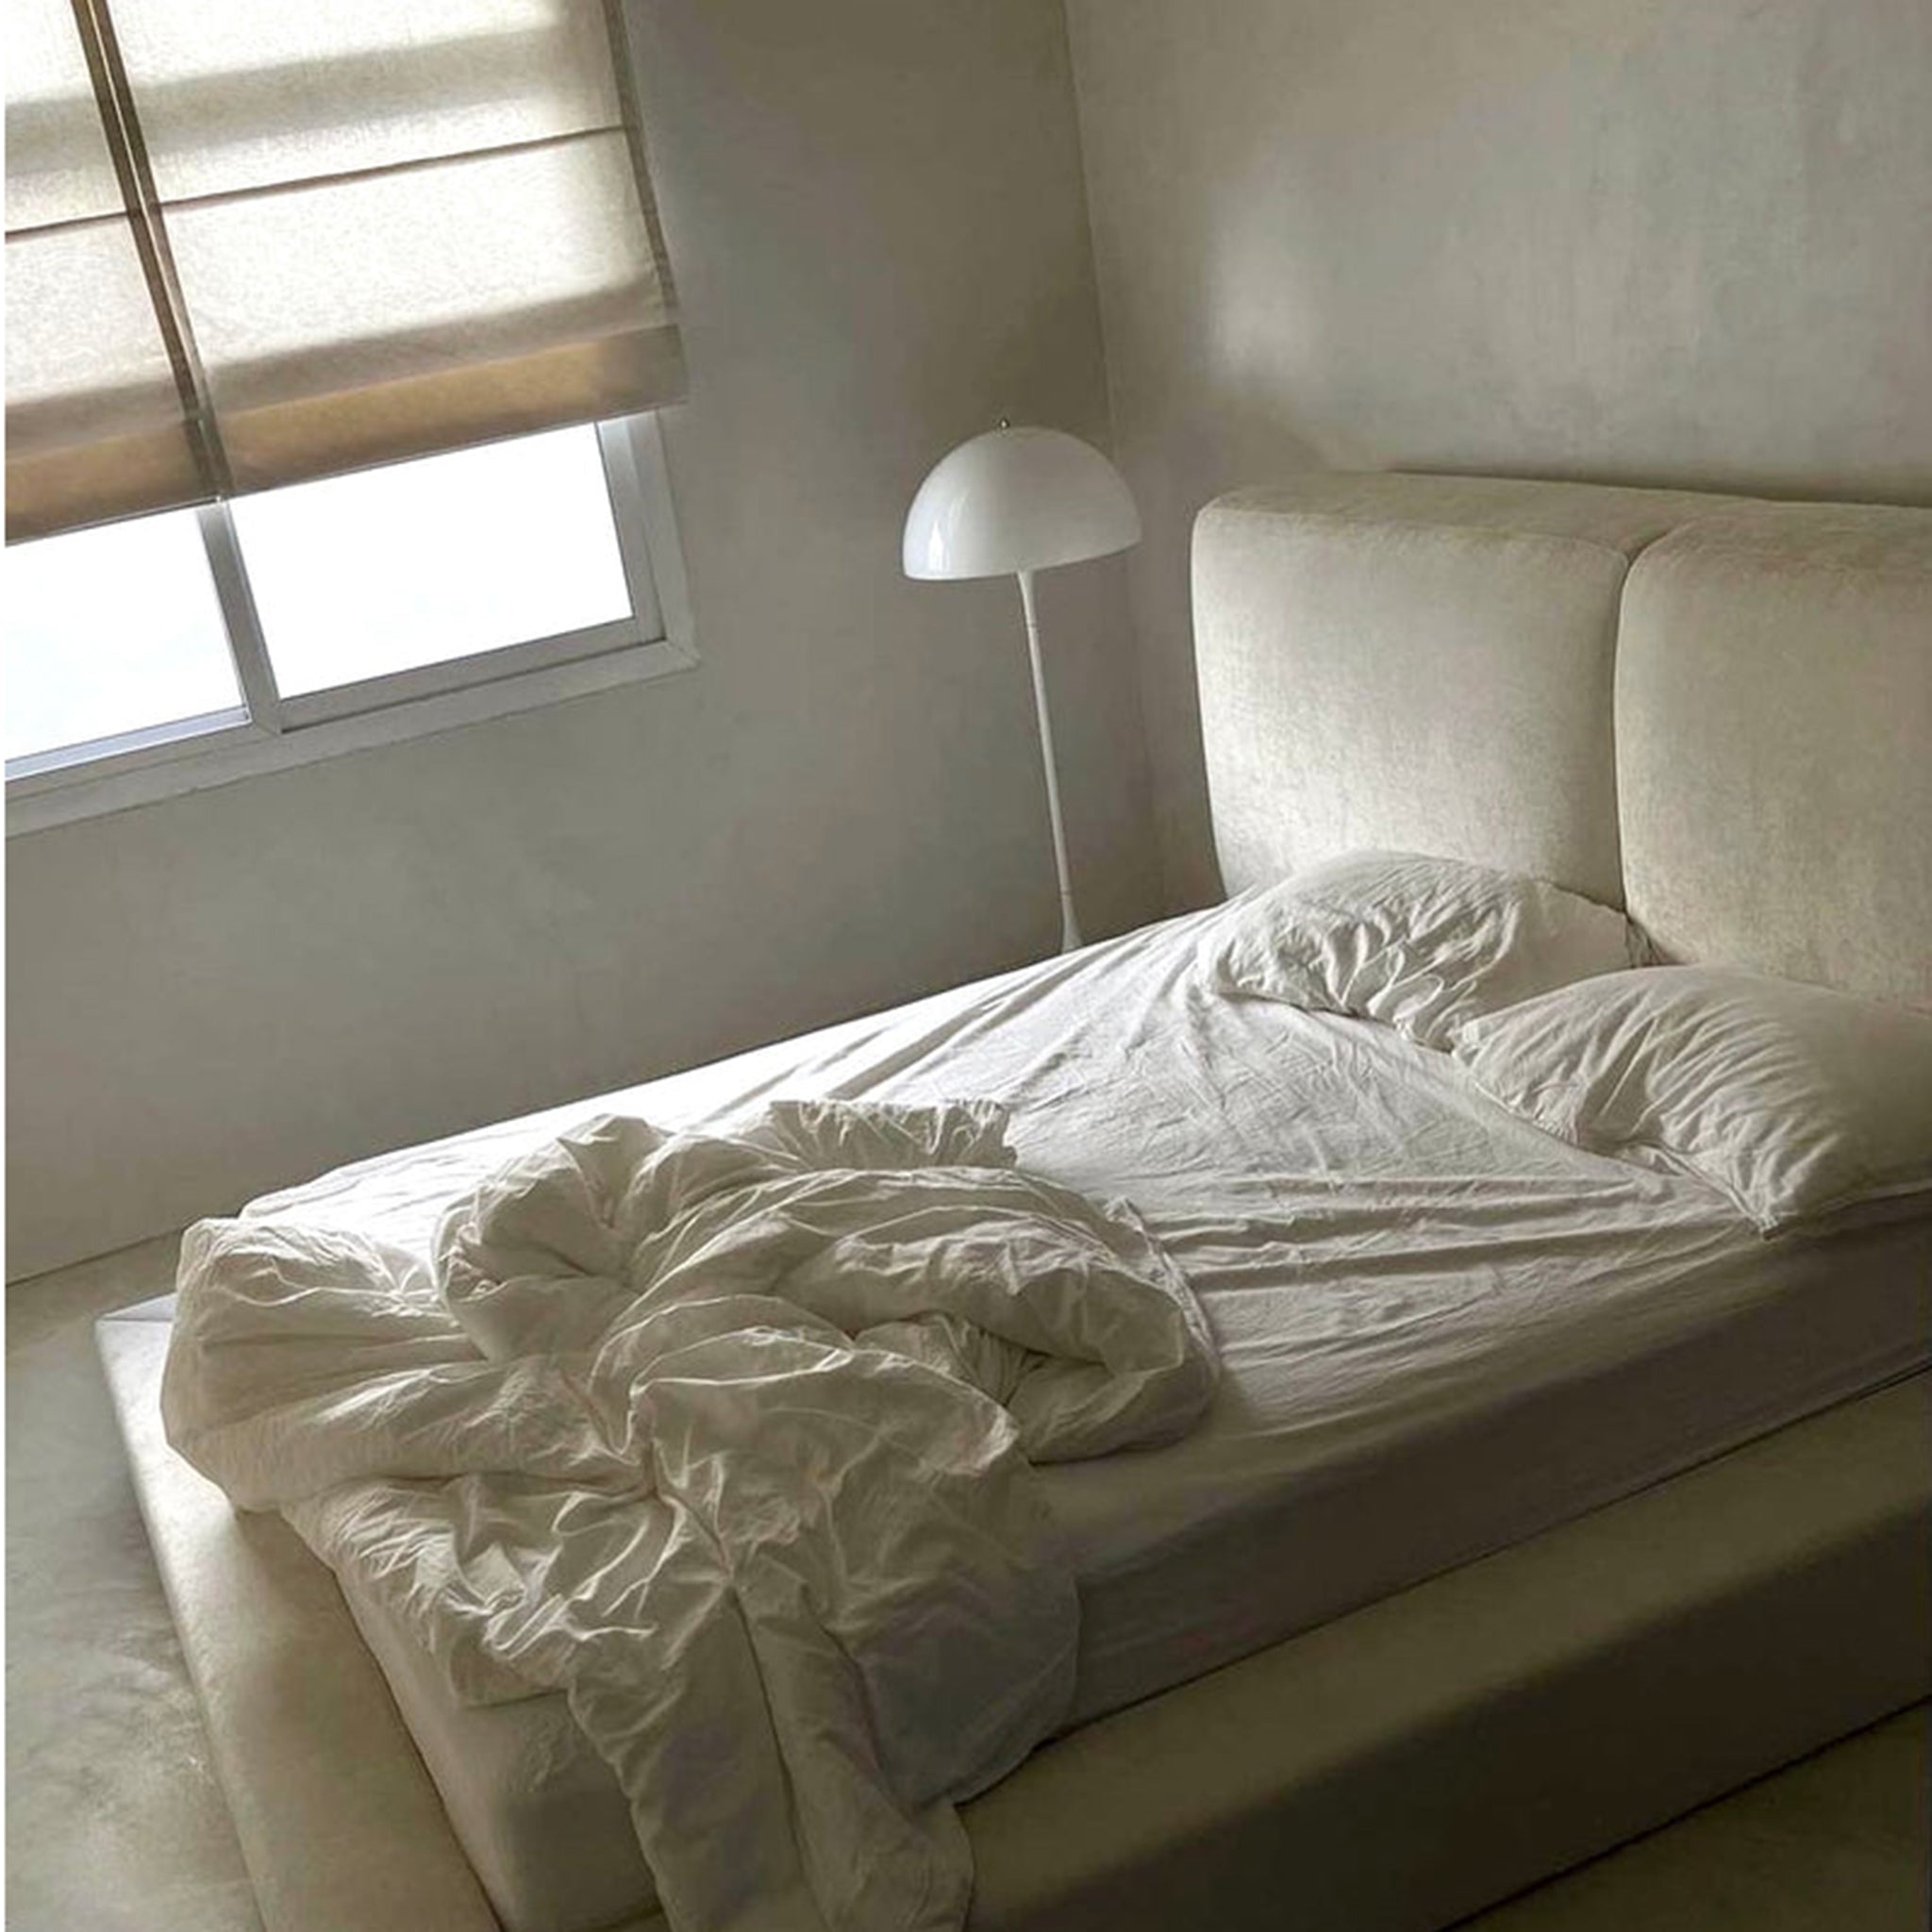 Light and airy bedroom corner featuring a cozy daybed. Perfect for reading, napping, or creating a relaxing seating area.